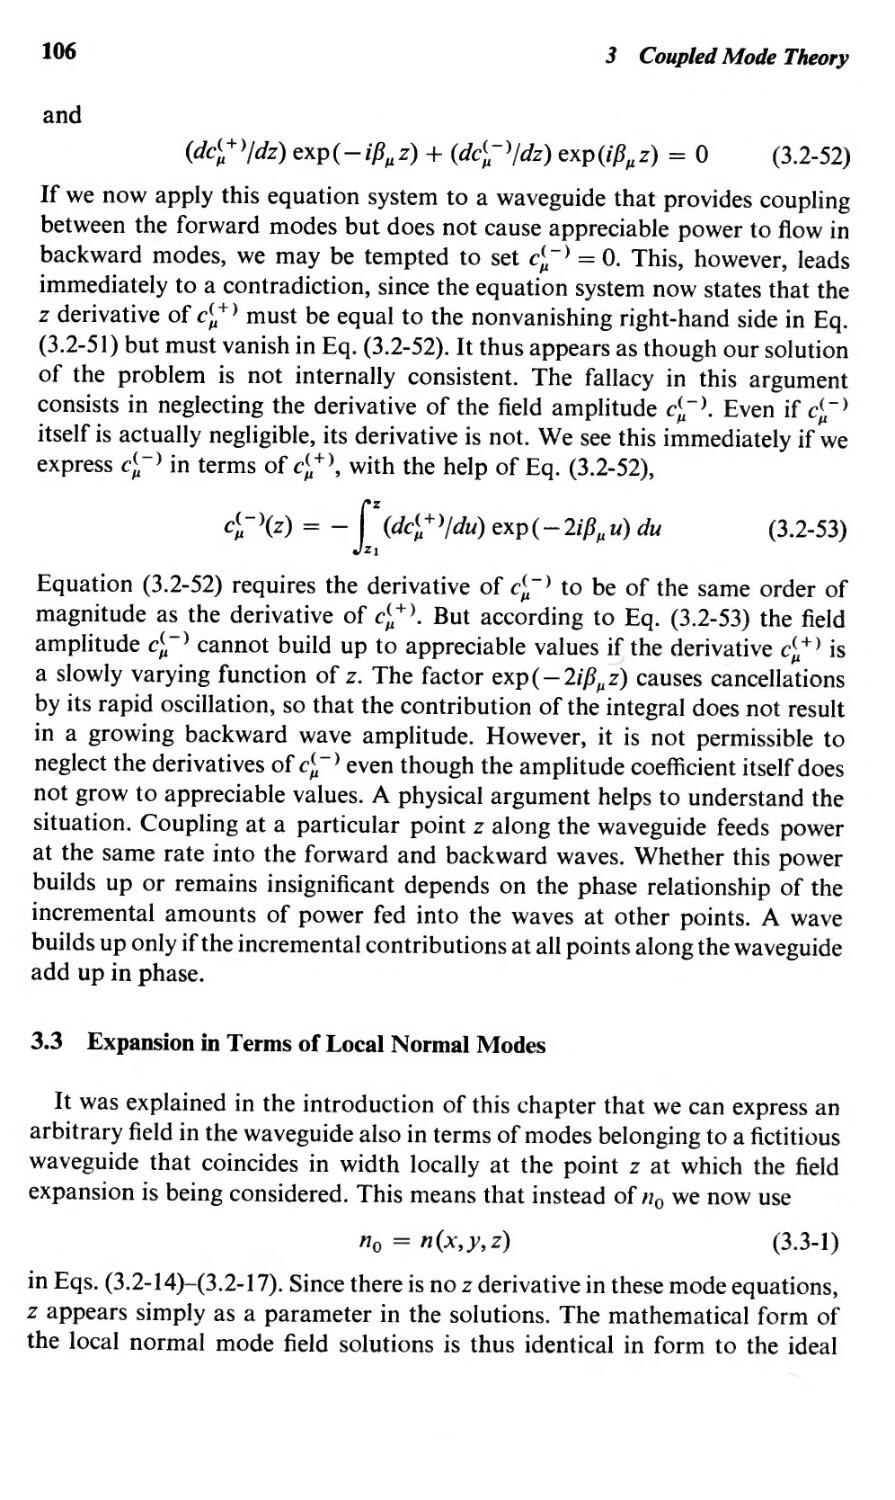 3.3 Expansion in Terms of Local Normal Modes 106
--- local modes, 106
Local mode expansion, 106